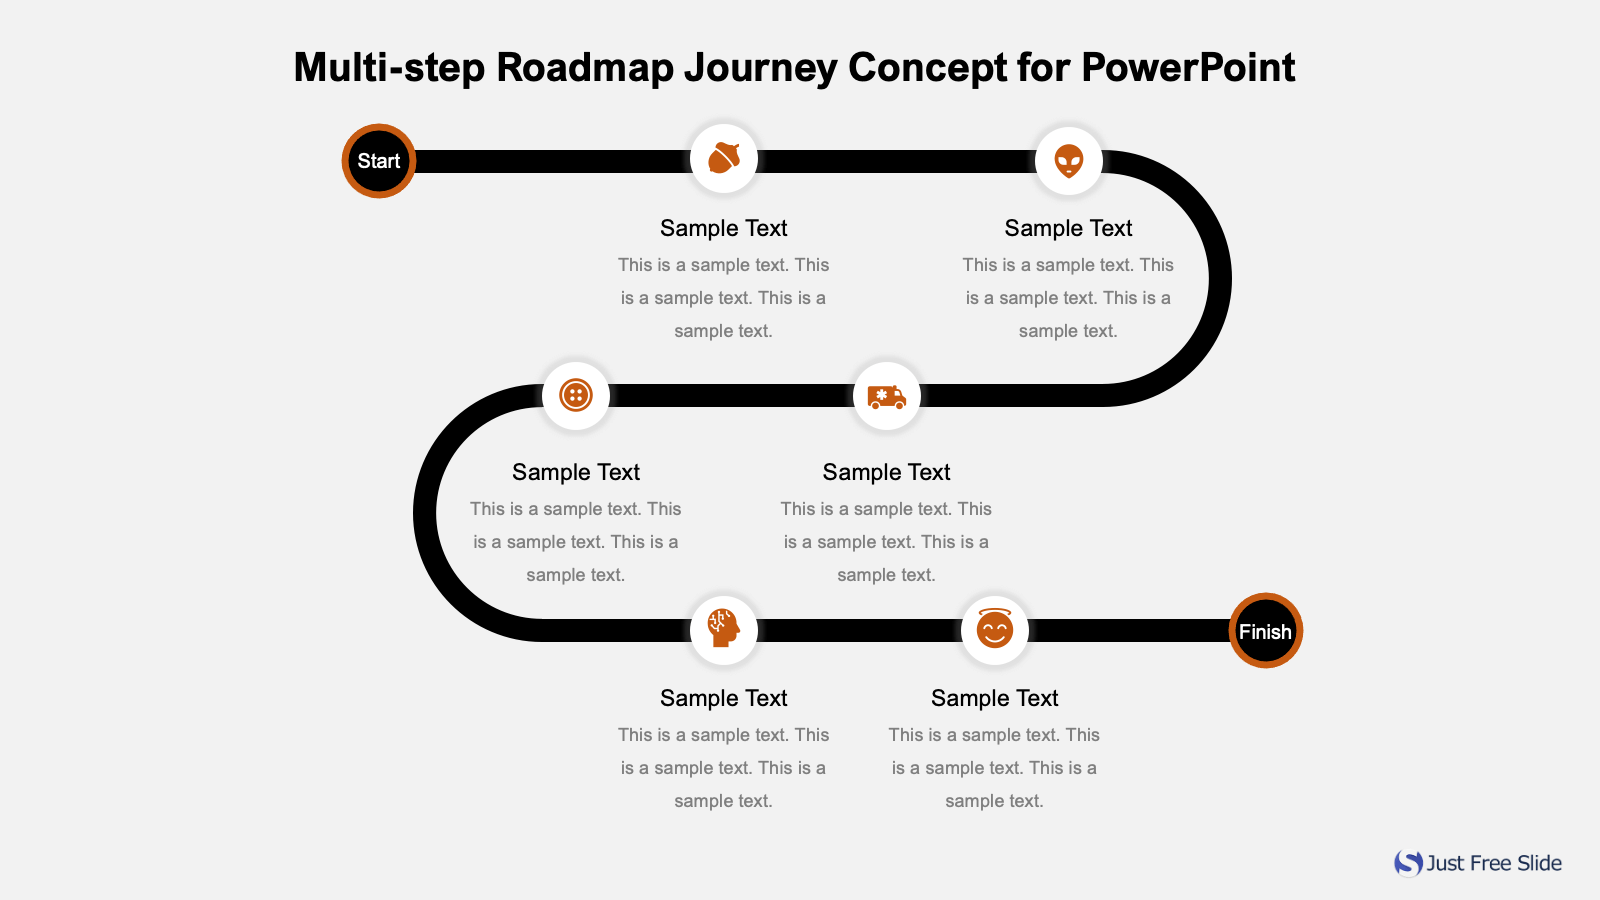 Multi-step Roadmap Journey Concept for PowerPoint Free Download